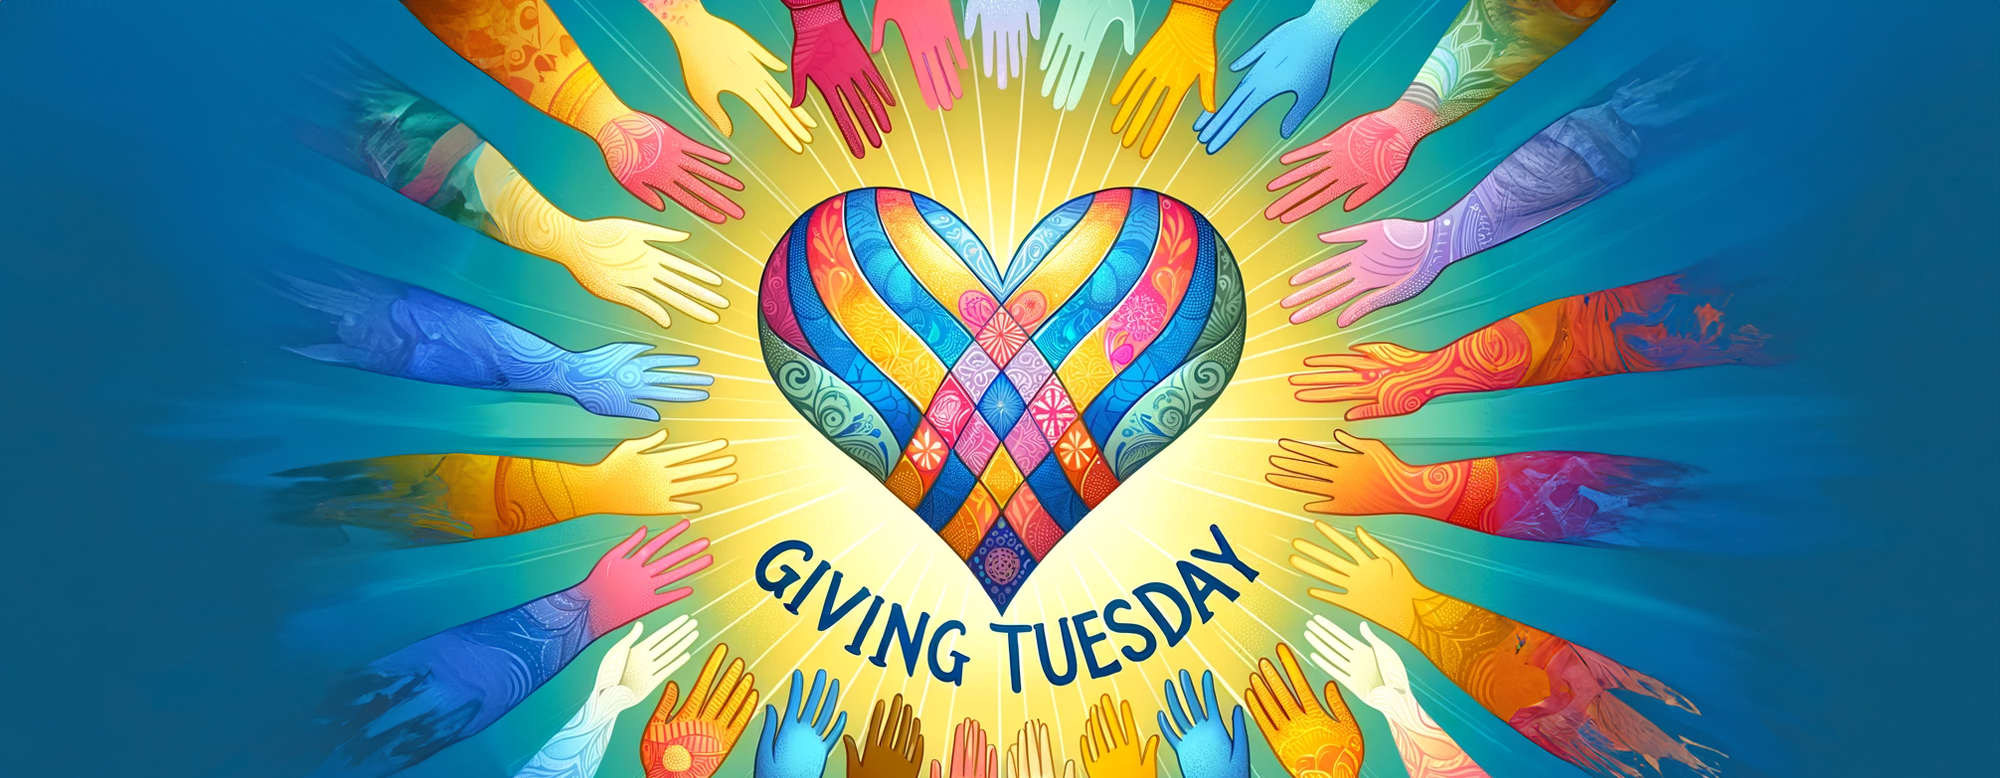 Join the movement “Give Today to Give Hope to Others Tomorrow!